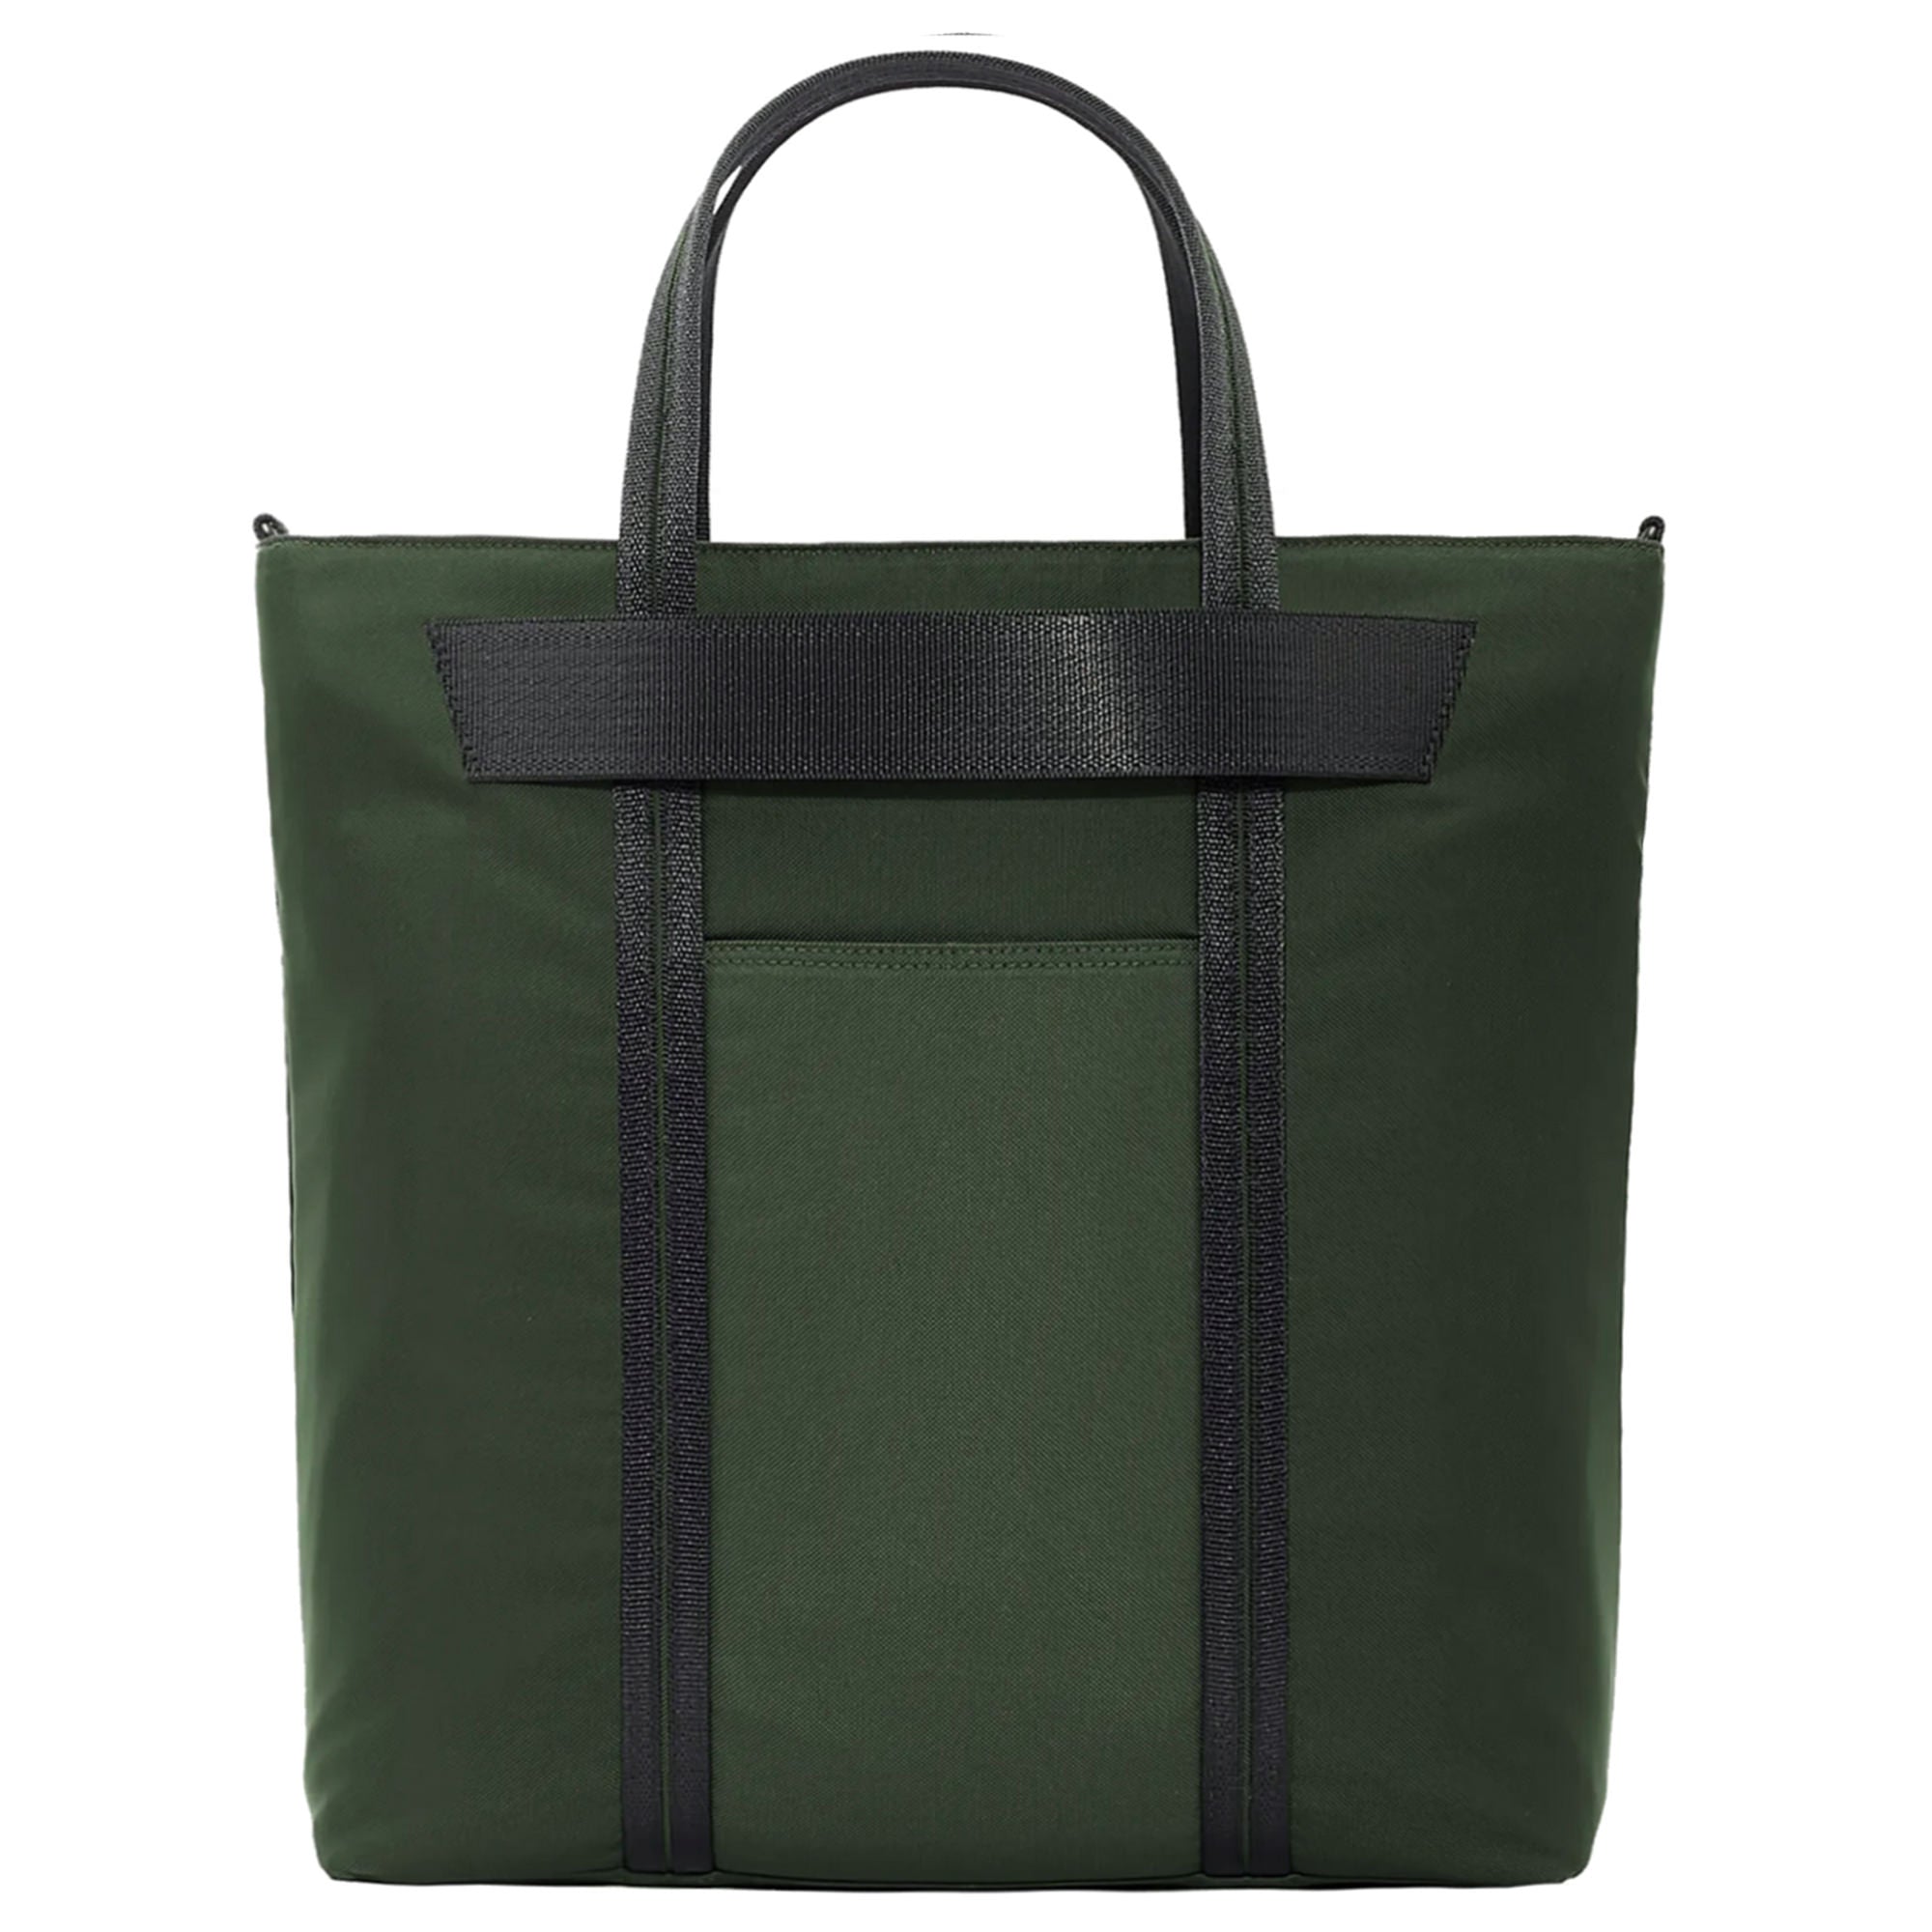 Back view of green Robin tote, showing back pocket and trolley sleeve